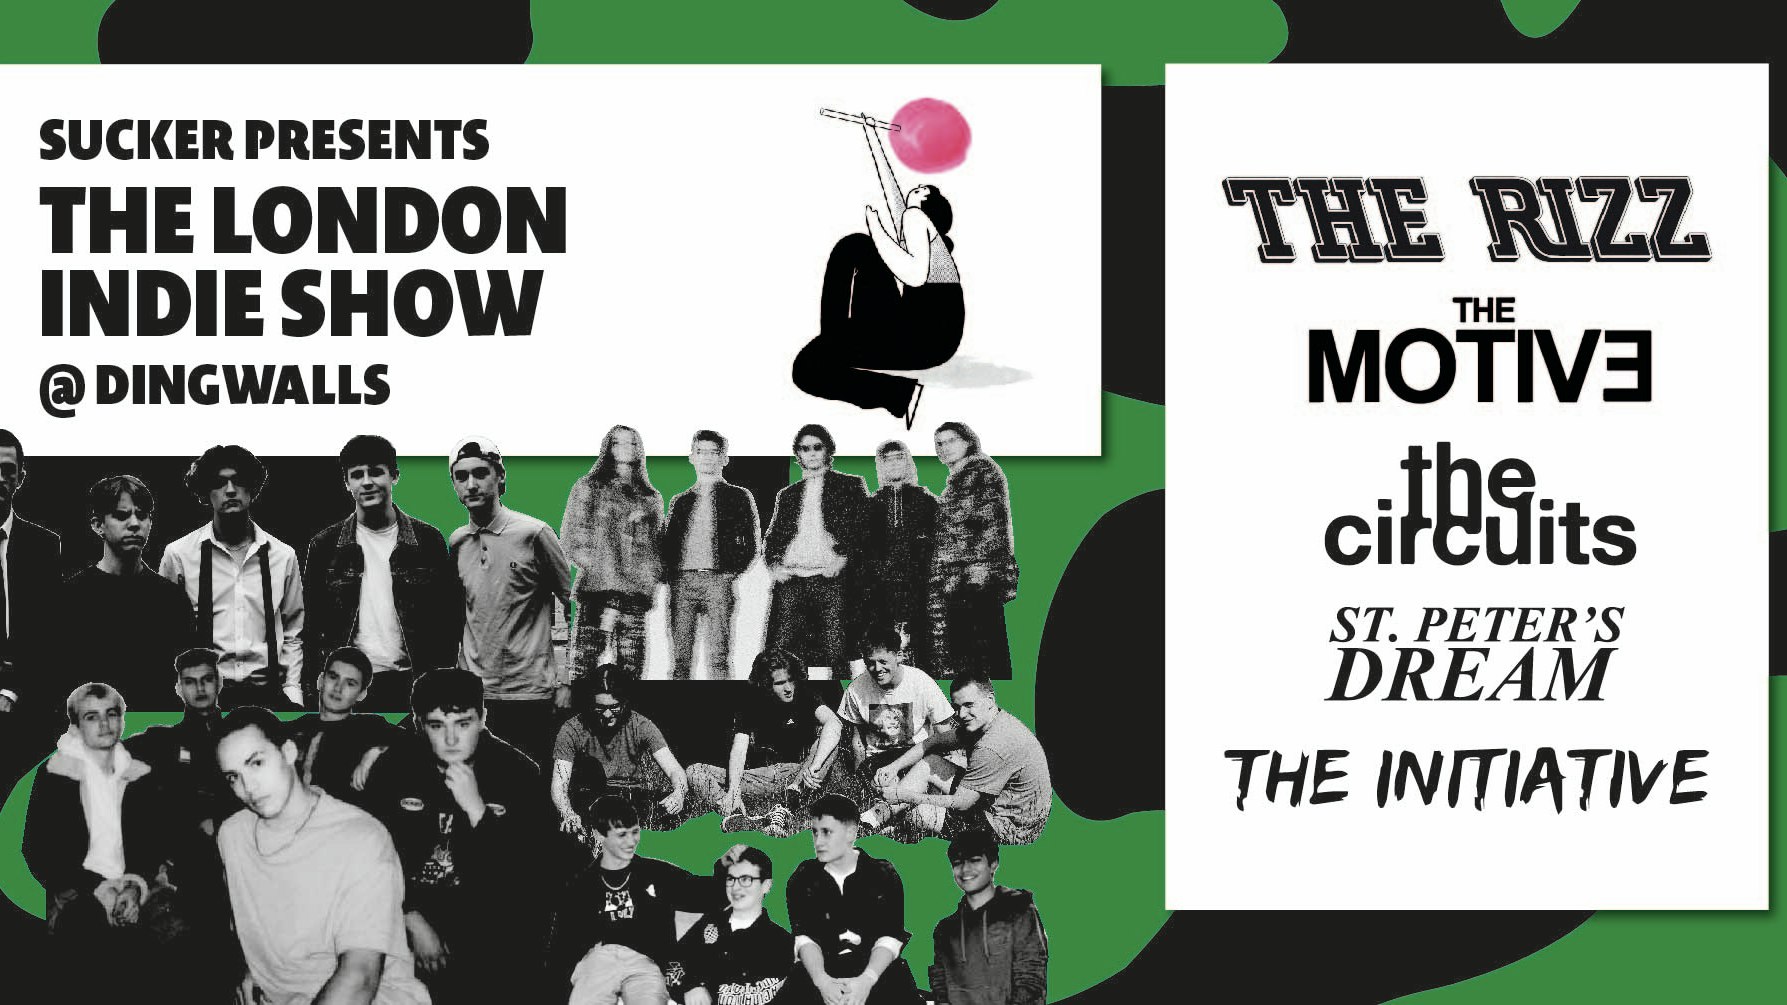 The London Indie Show at Dingwalls